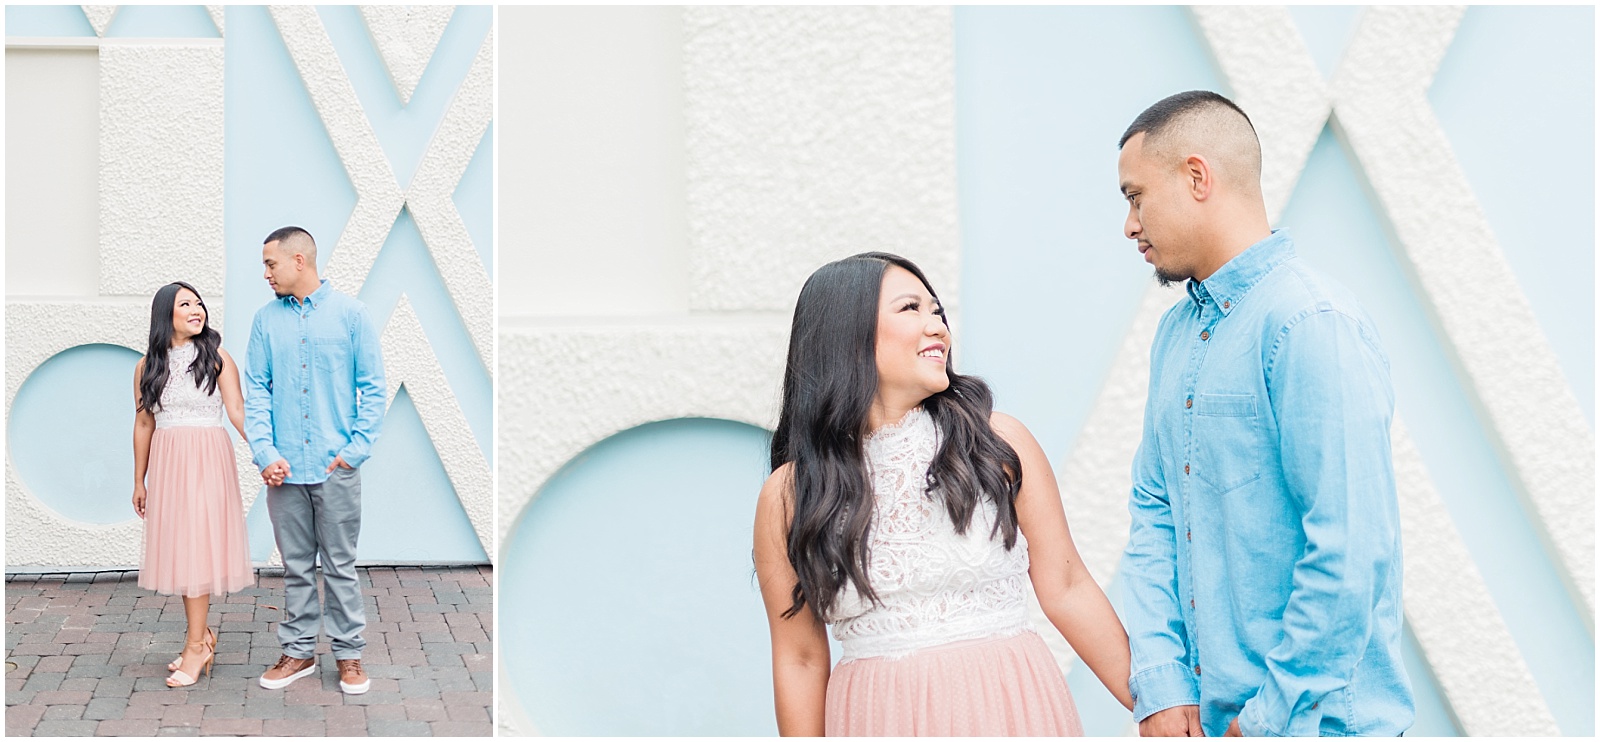 Disneyland Engagement Session.  Photography by Mollie Jane Photography.  To see more go to www.molliejanephotography.com